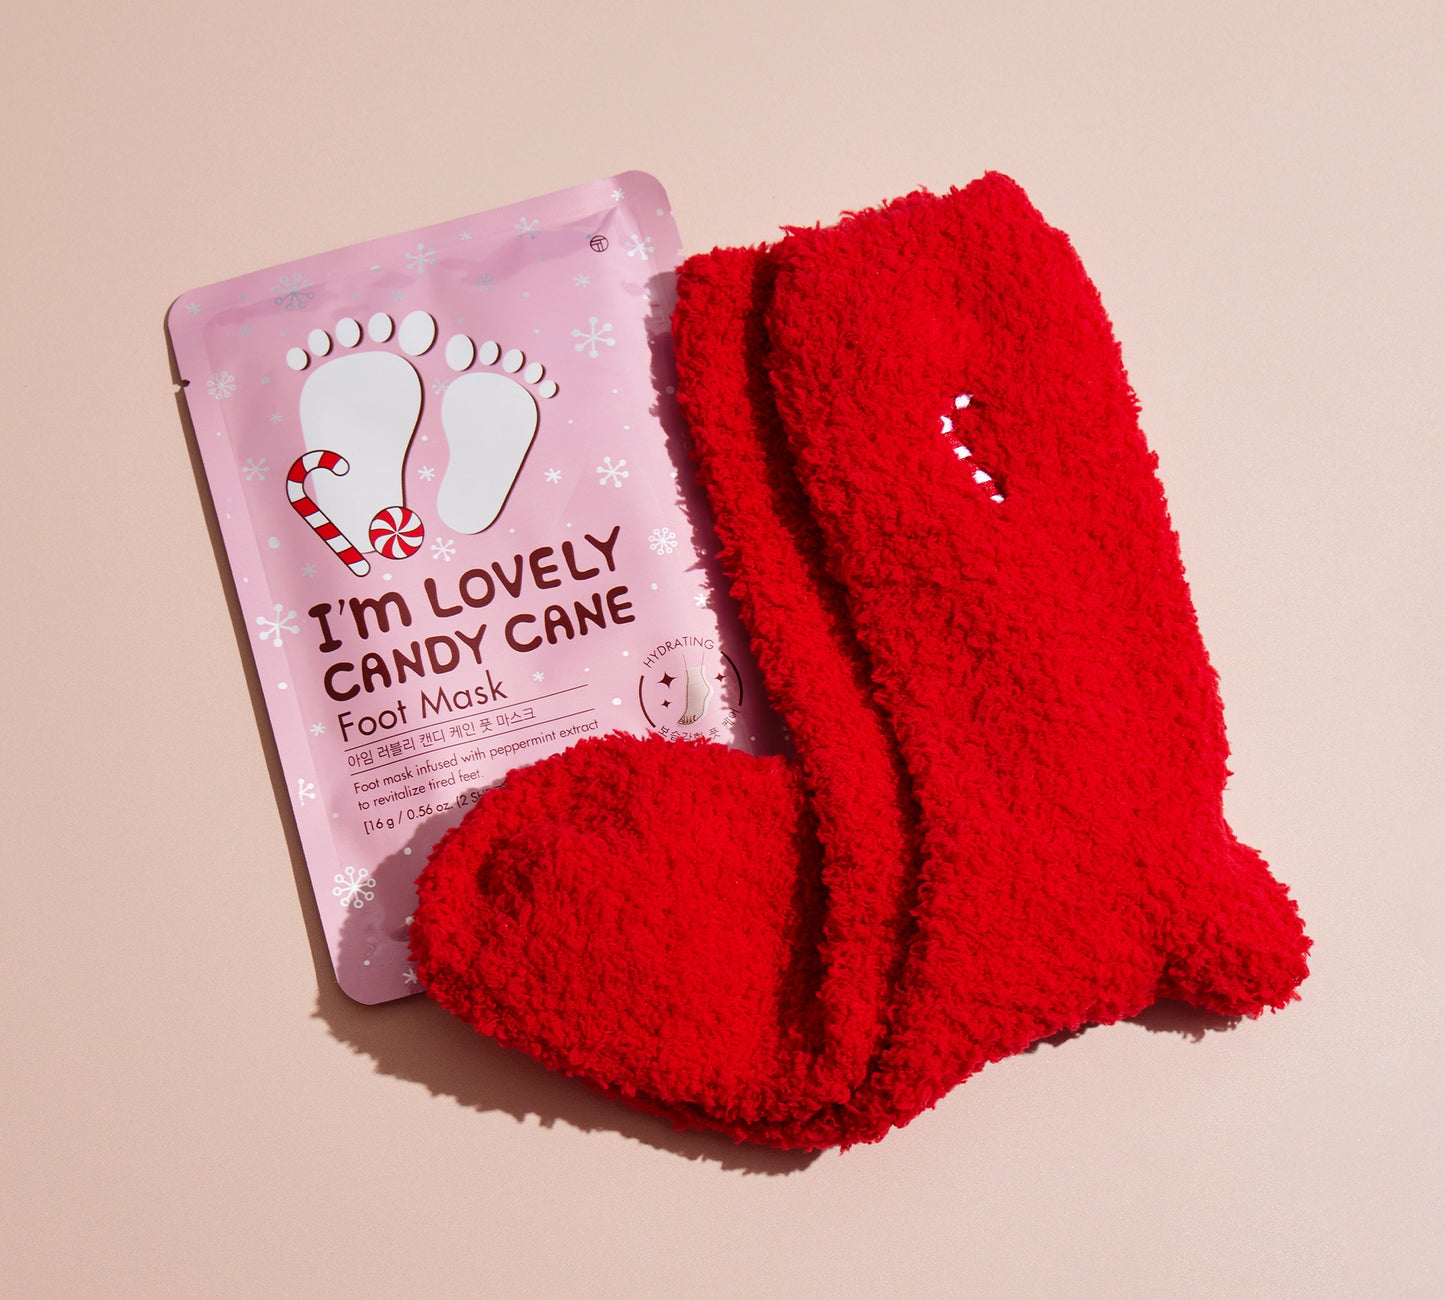 I'm Lovely Candy Cane - Foot Mask and Sock Set